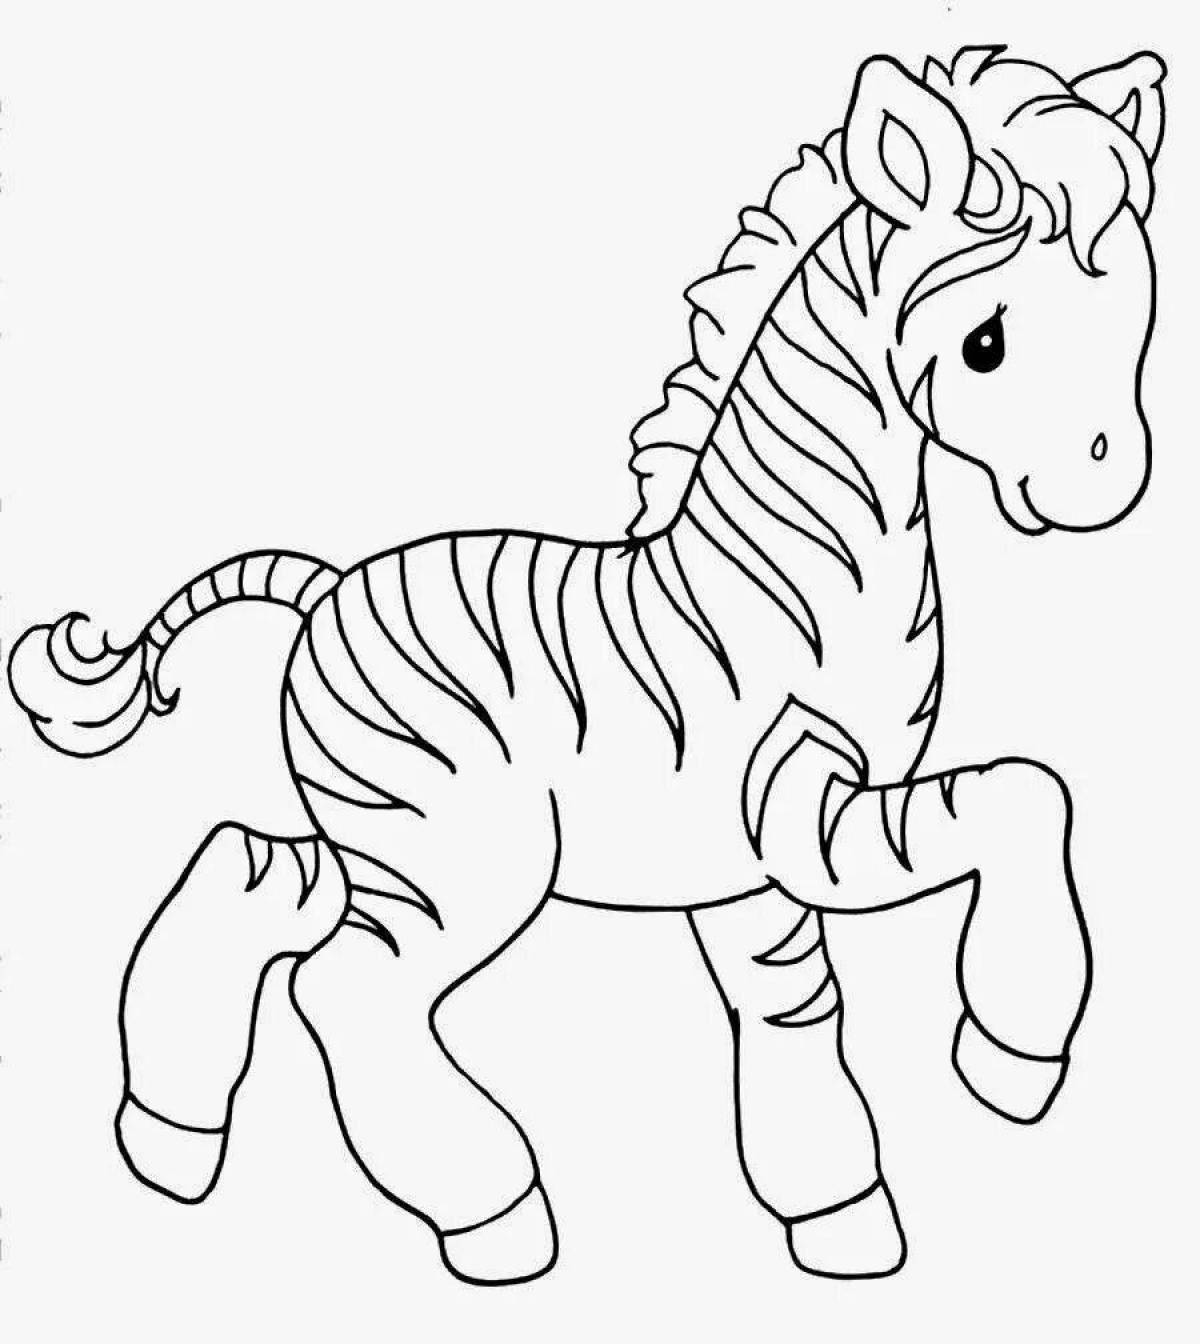 Amazing zebra coloring book for 3-4 year olds